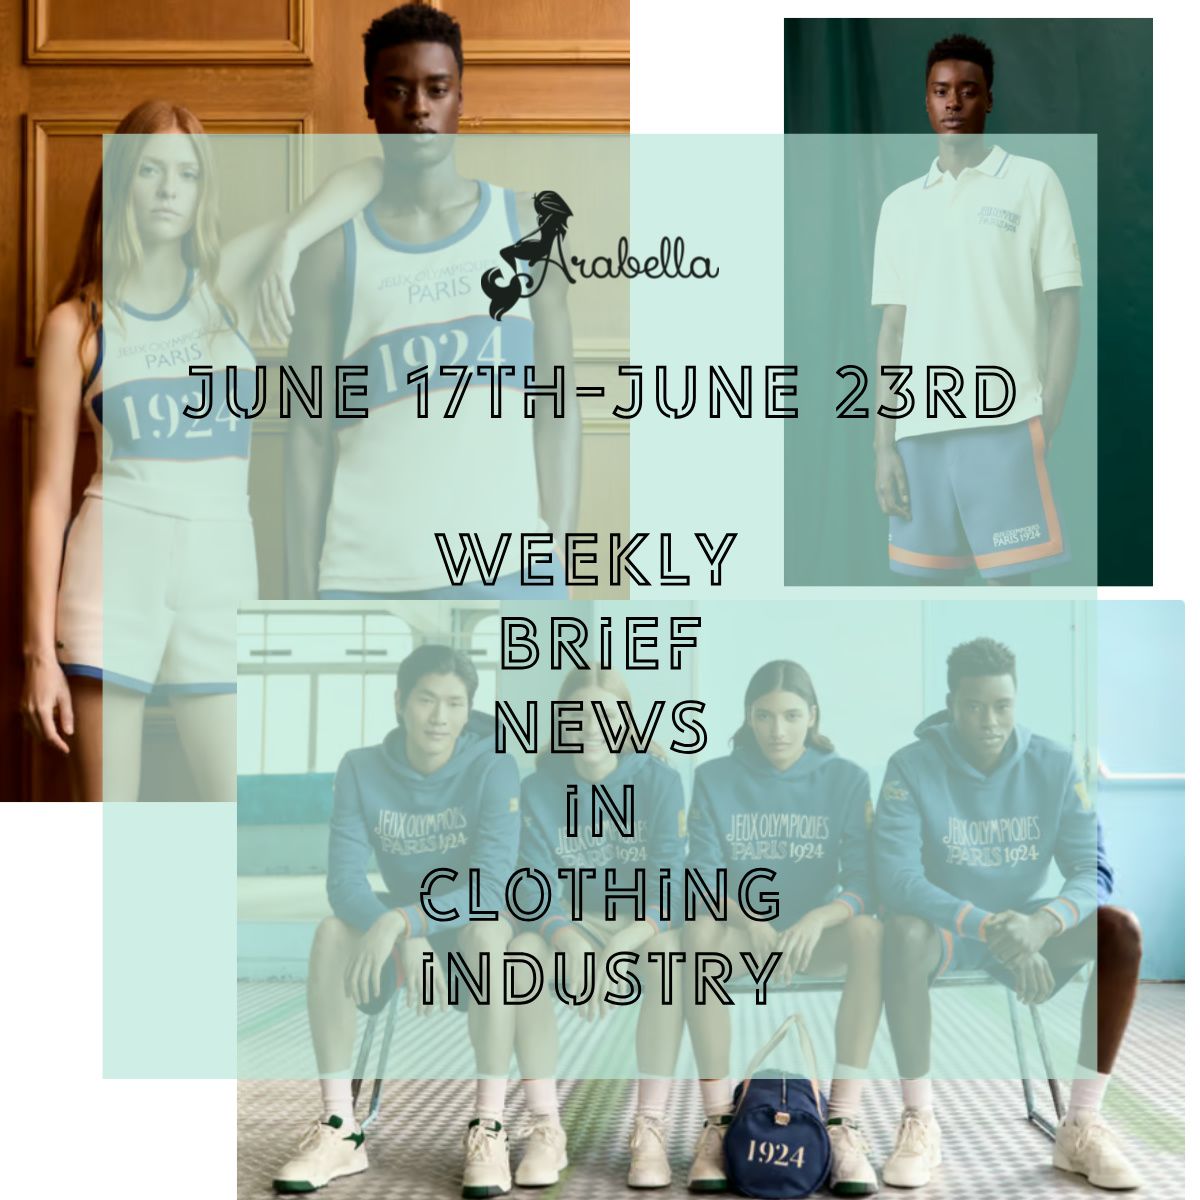 Arabella | Get Ready for The Big Game: Weekly Brief News of Clothing Industry During June 17th-23rd